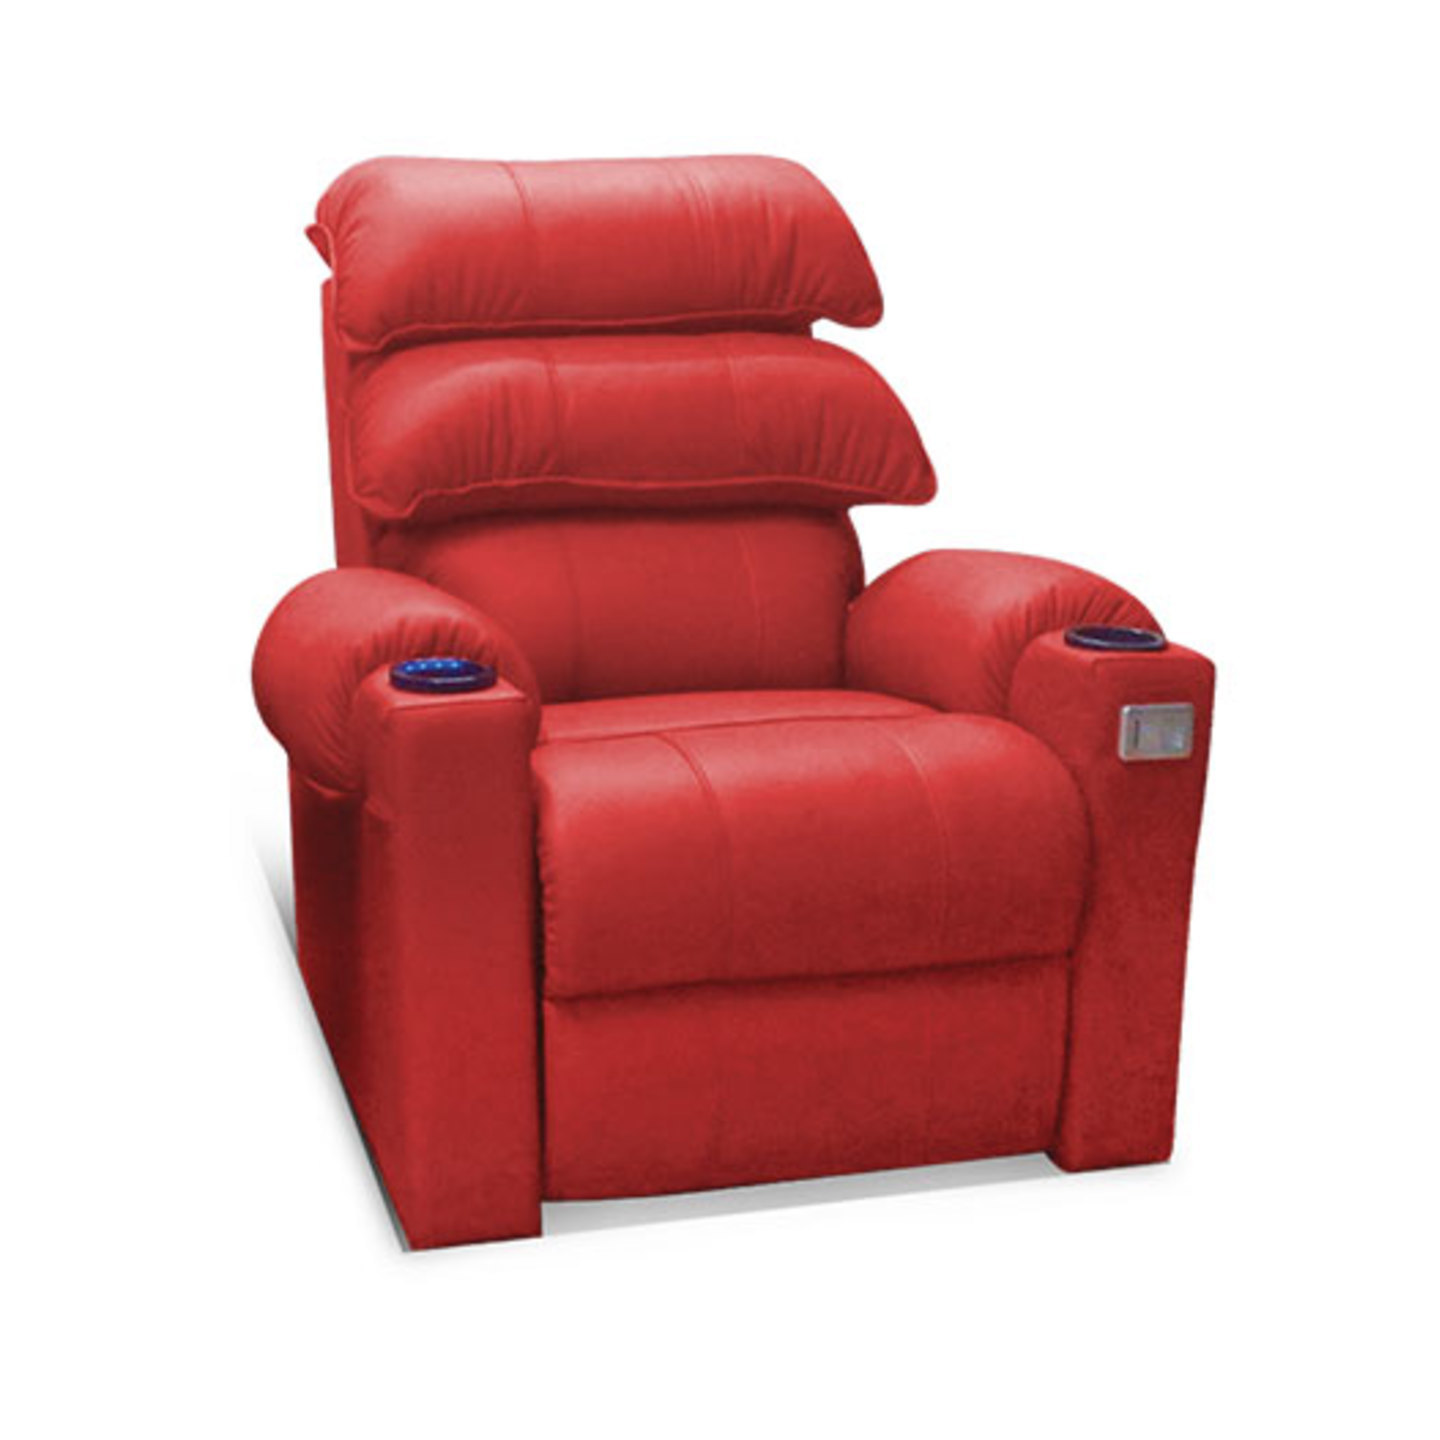 LN Recliner Chair Luxe Electronic System In Red Colour